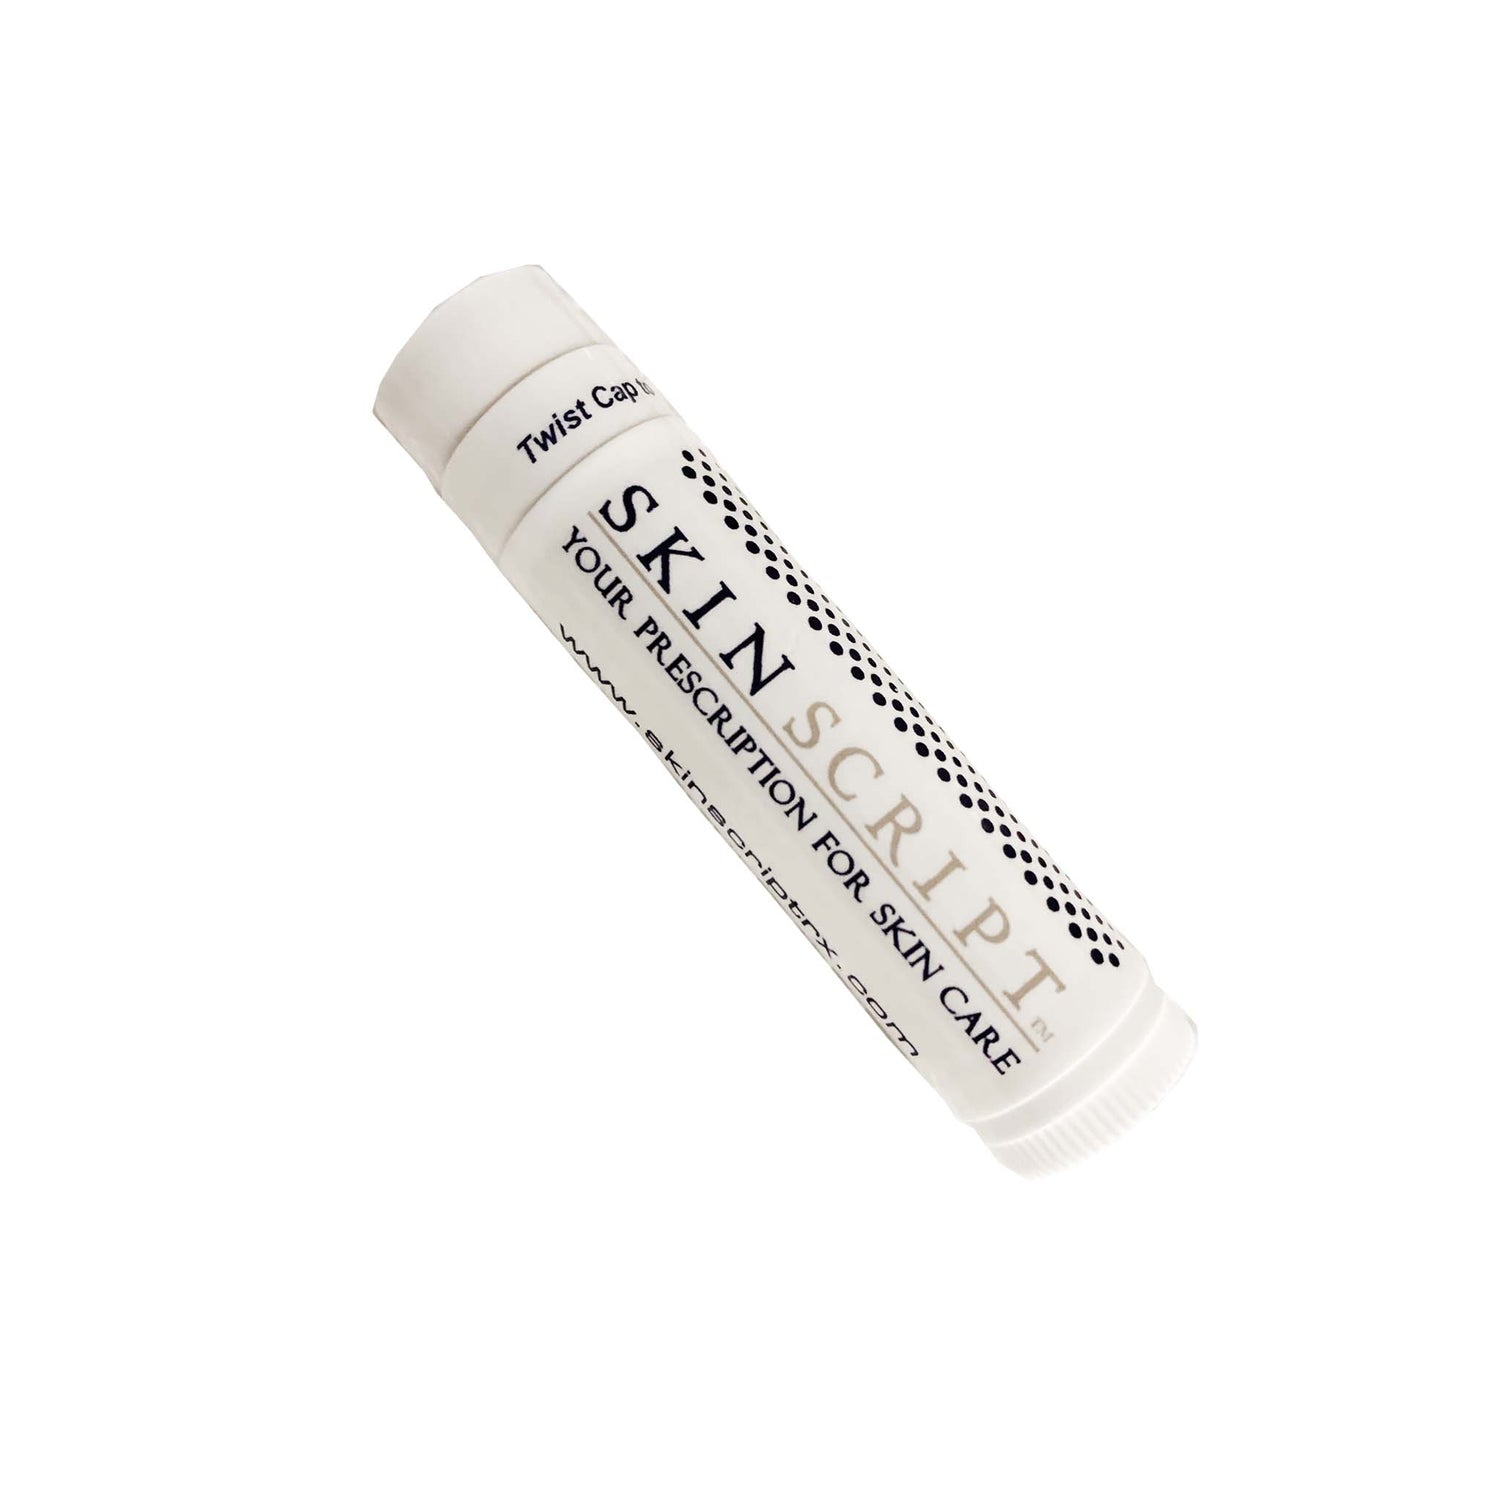 Skin Script Lip Balm SPF 15 keeps your lips protected from sun damage and hydrated.  